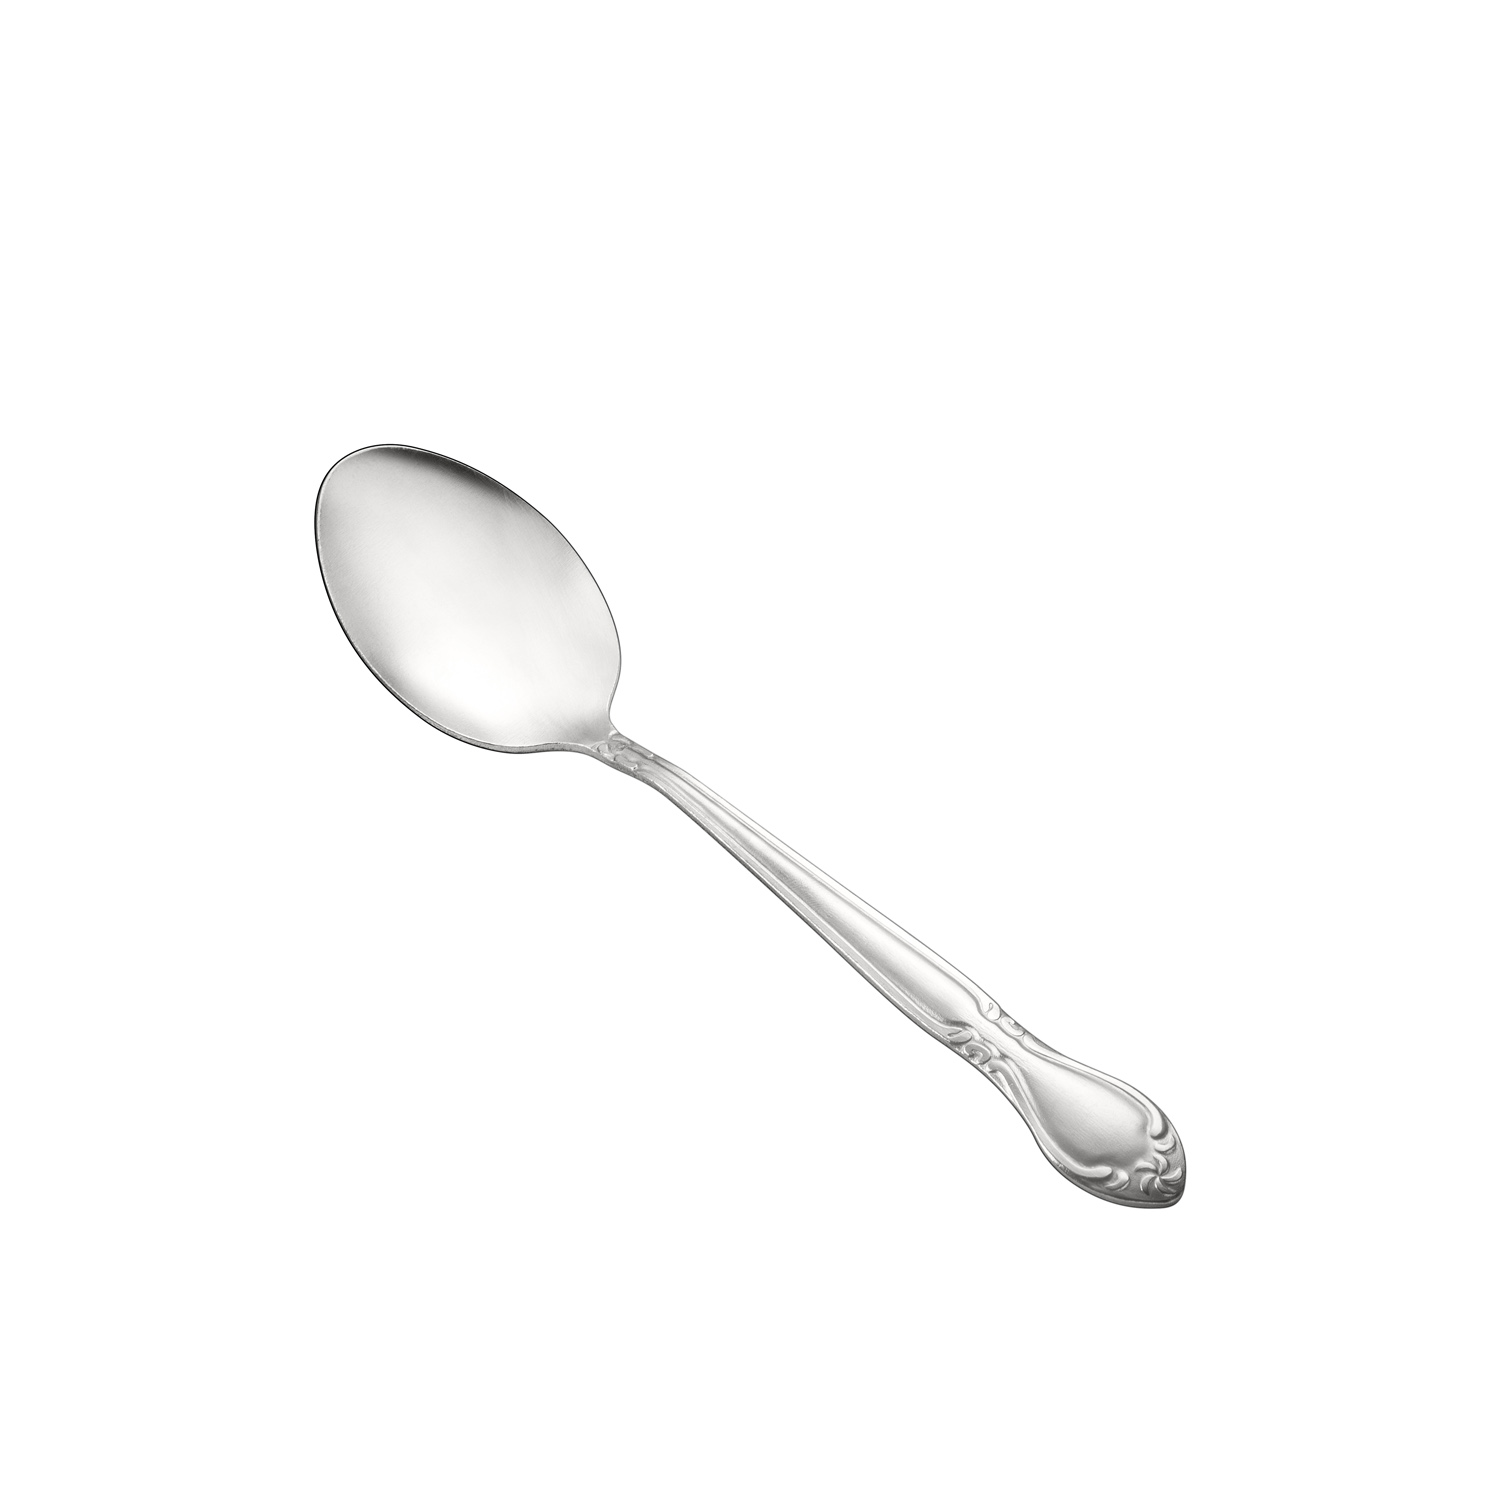 CAC China 2003-10 Elizabeth Tablespoon Frost, Heavyweight 18/0, 8 3/8"